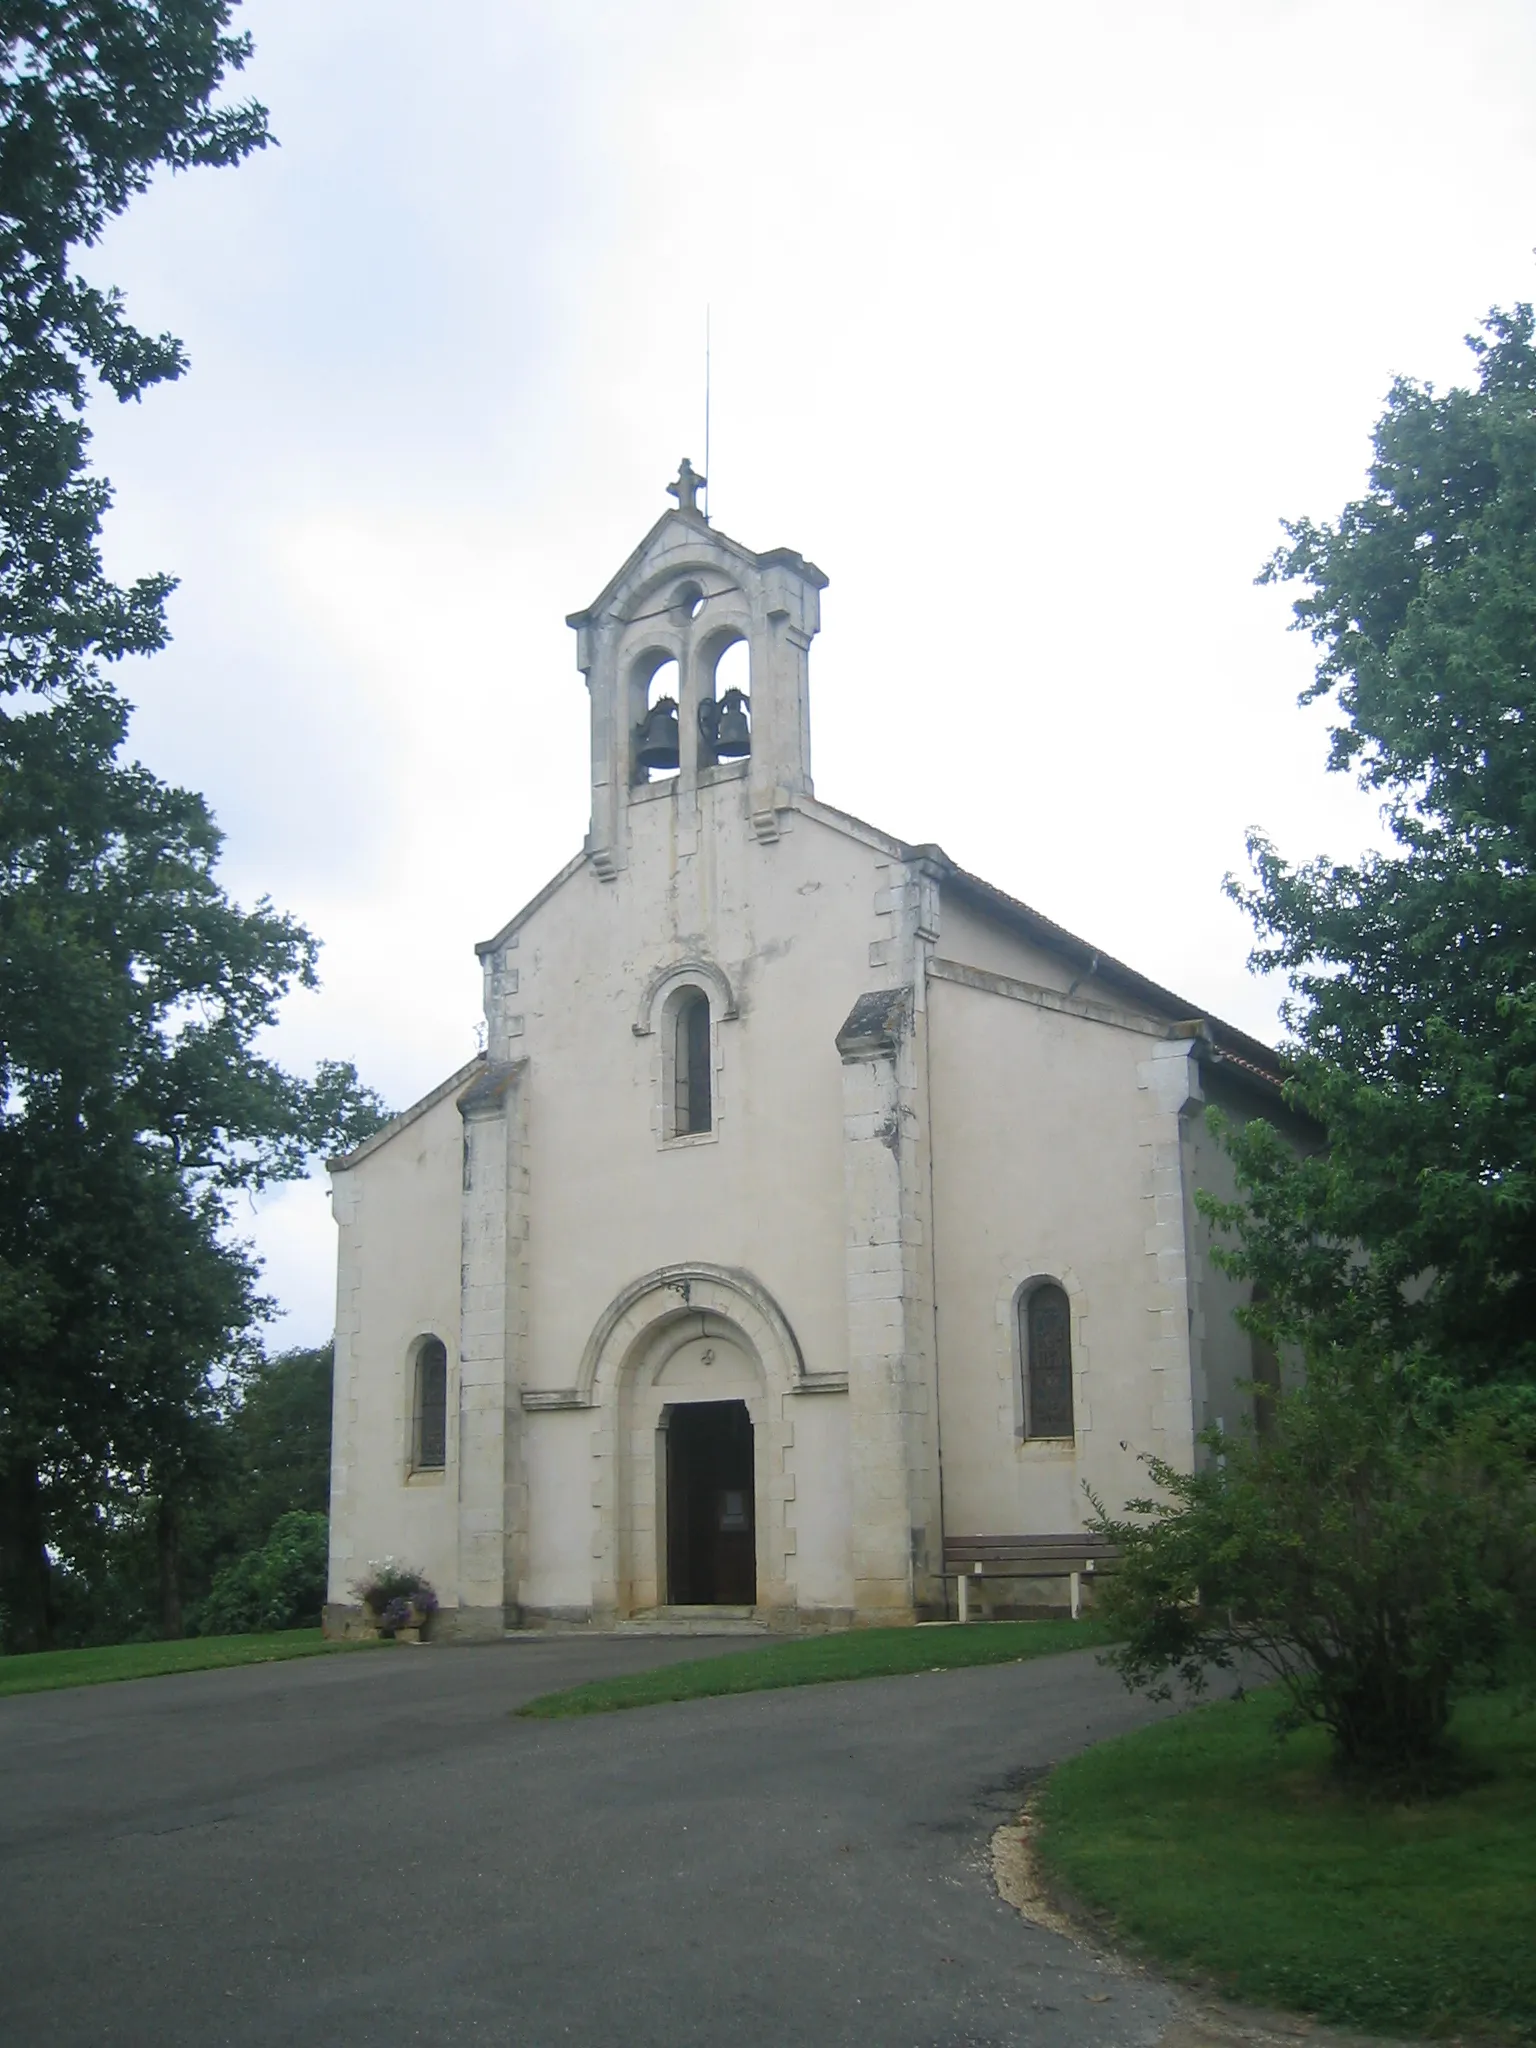 Photo showing: Église Miramont-Sensacq - the church in Miramont-Sensacq, France (Note: Picture has Geotag information stored in EXIF.)